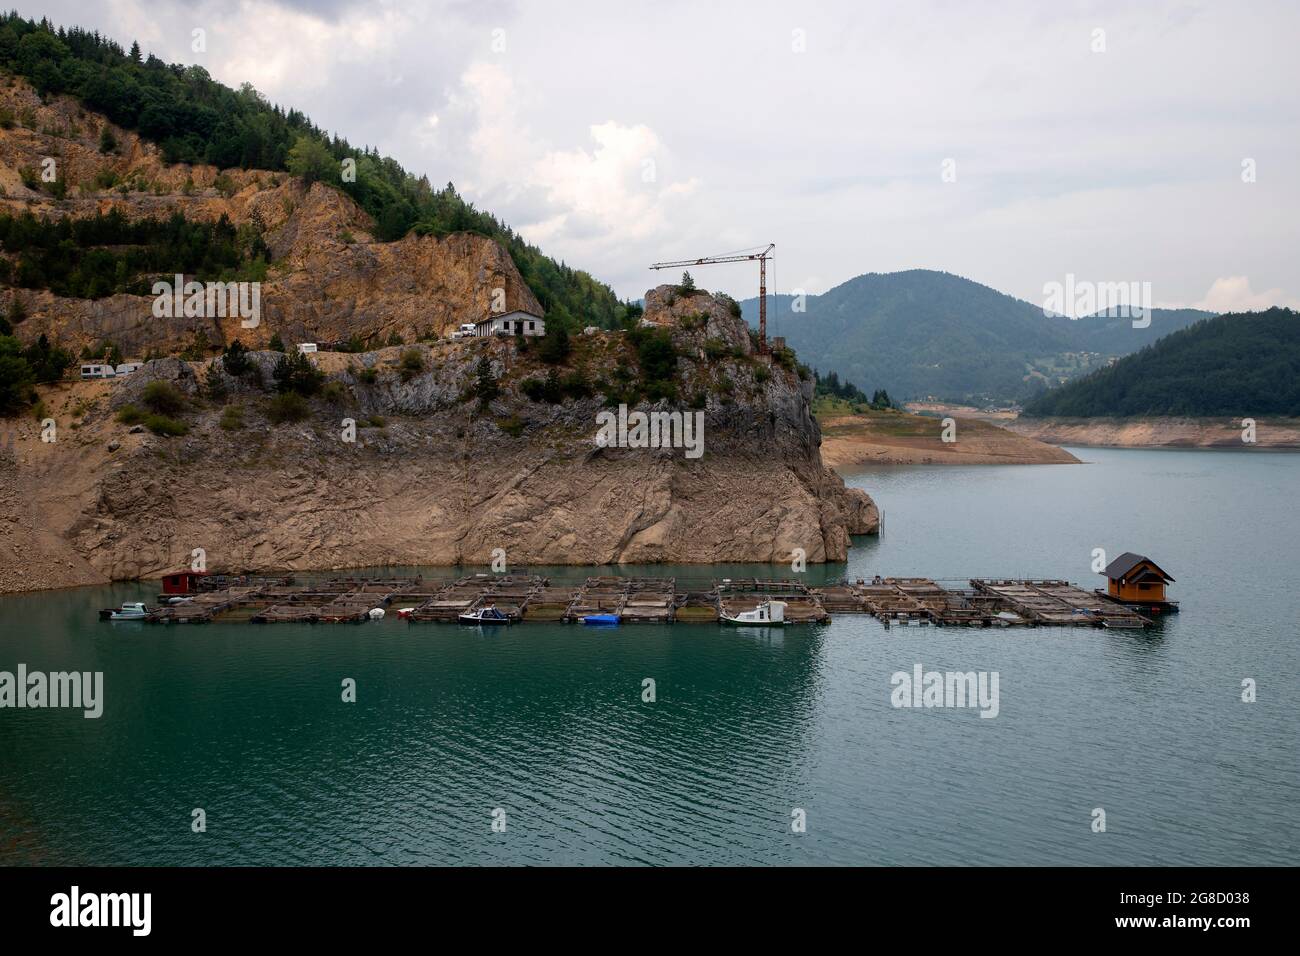 Serbia - Floating cages of trout farm on the Tara Mountain at Lake Zaovine Stock Photo